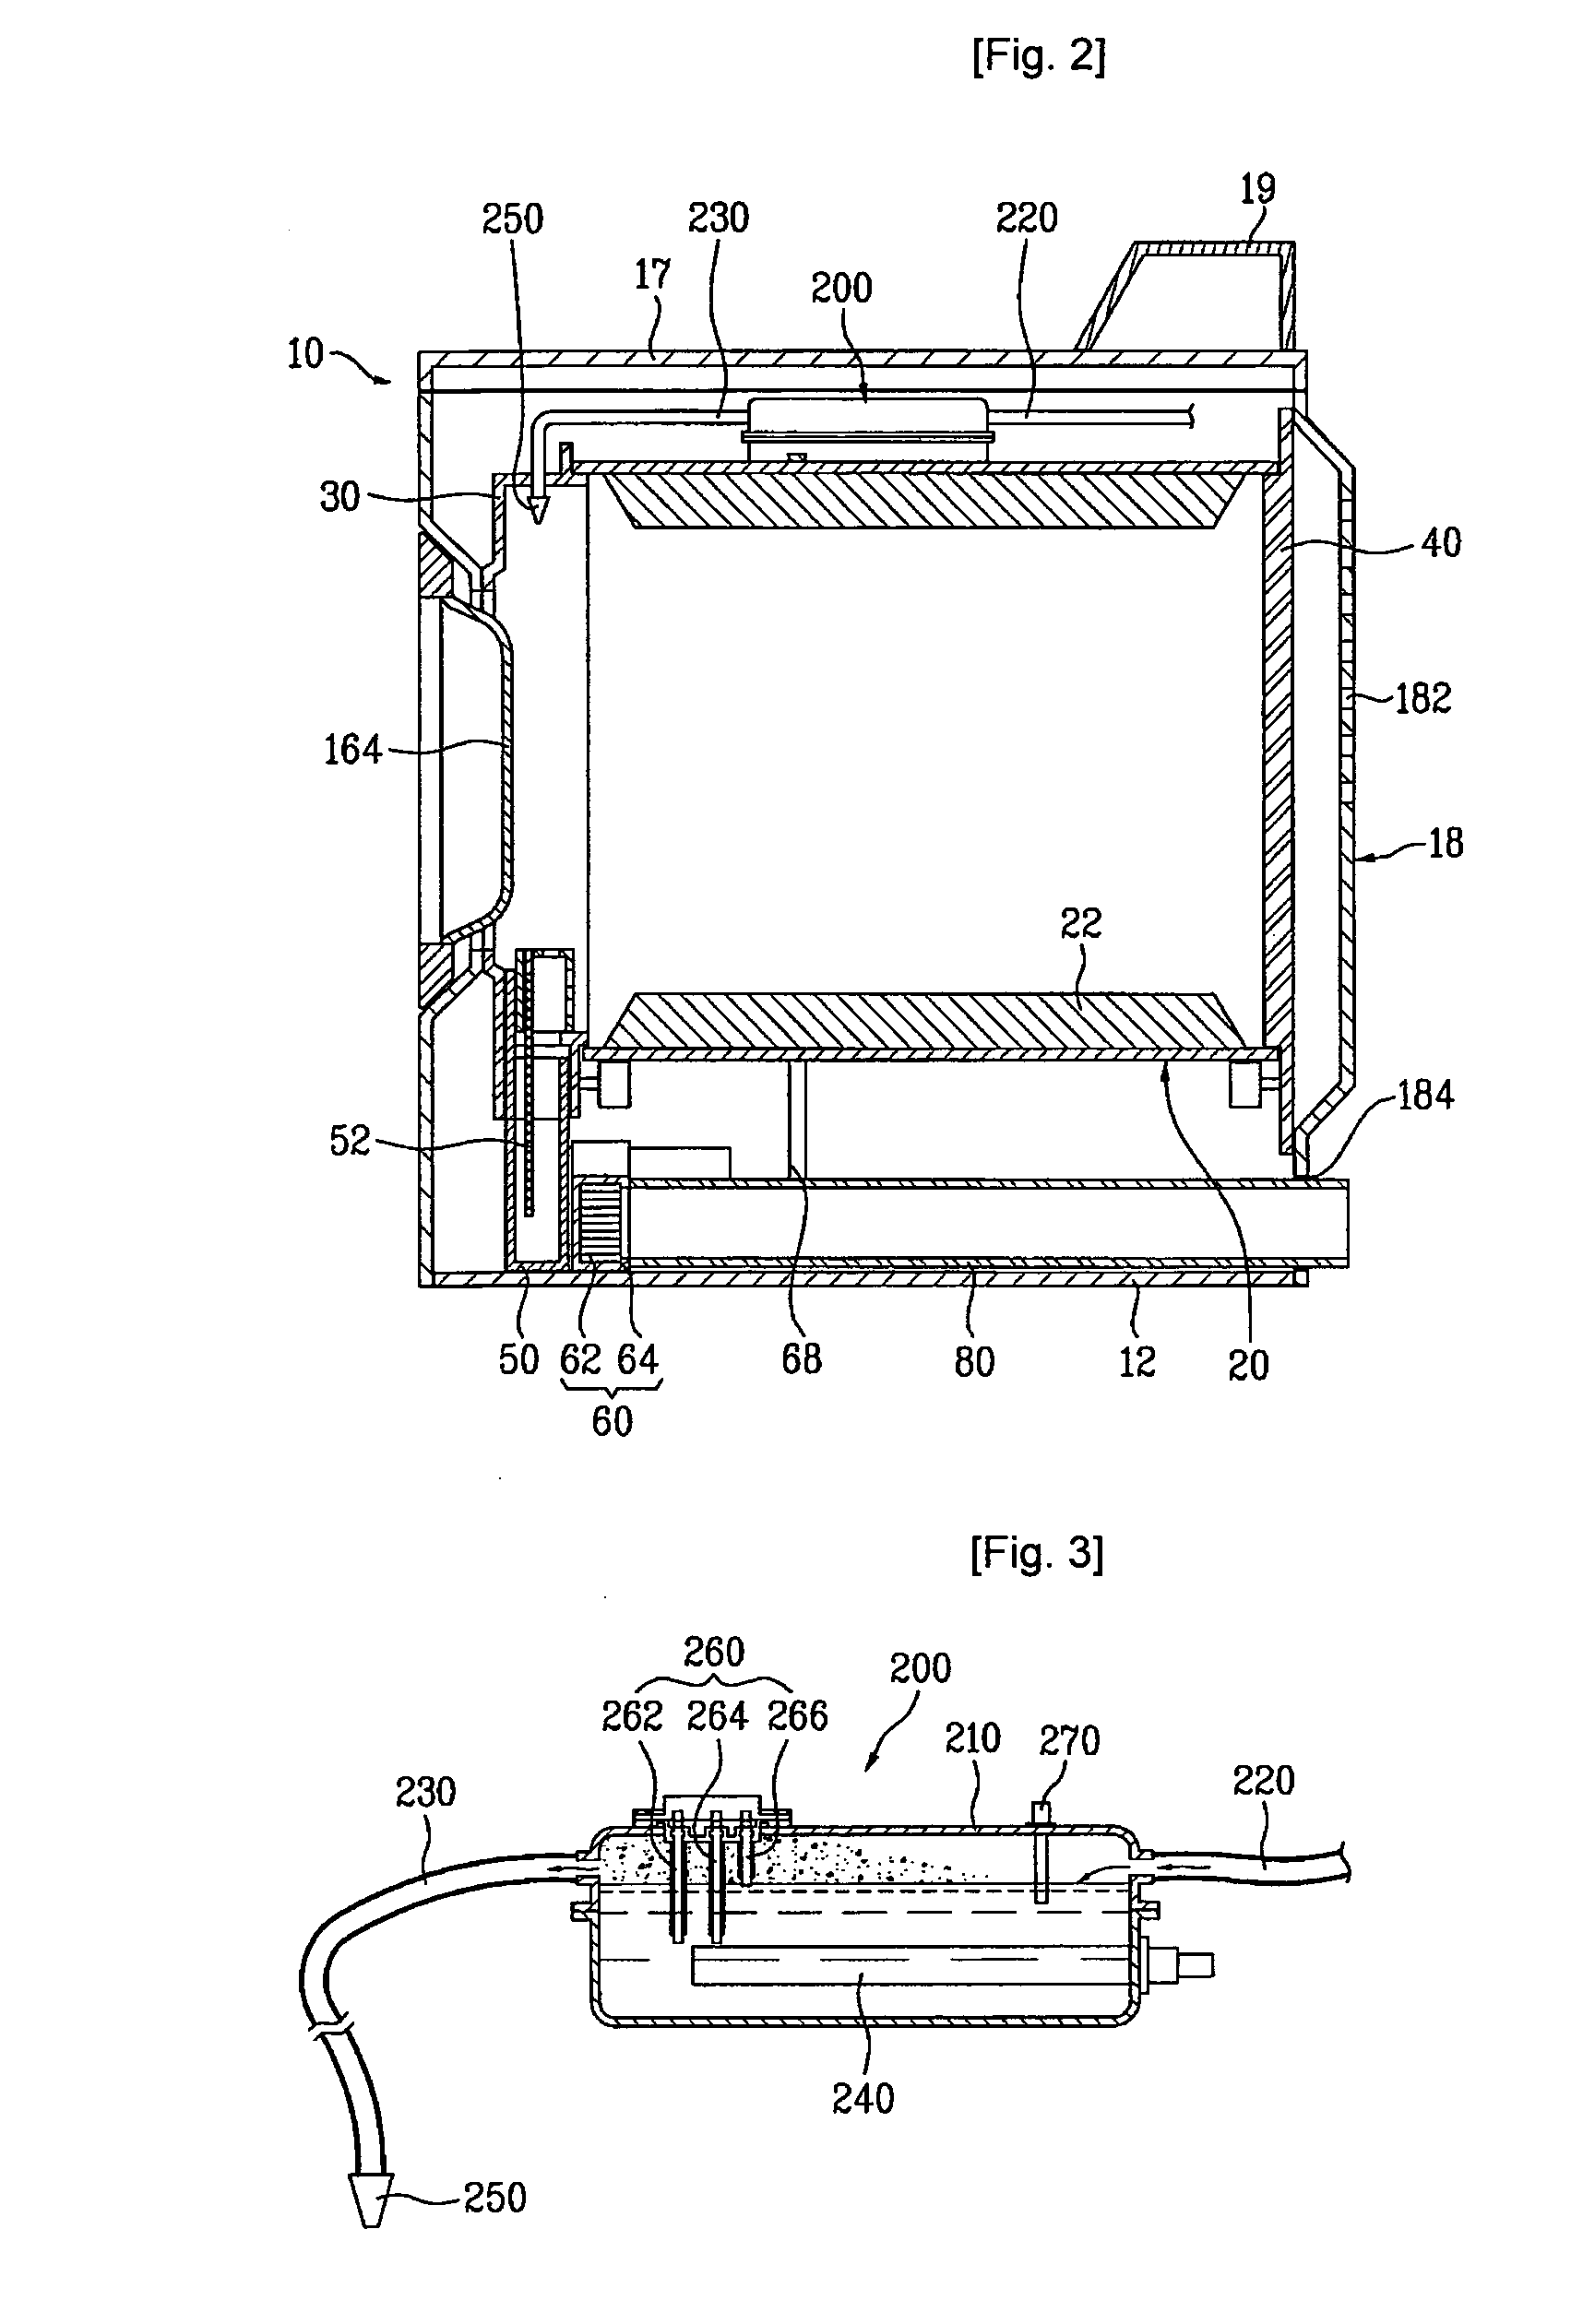 Laundry Dryer and Method for Controlling the Same